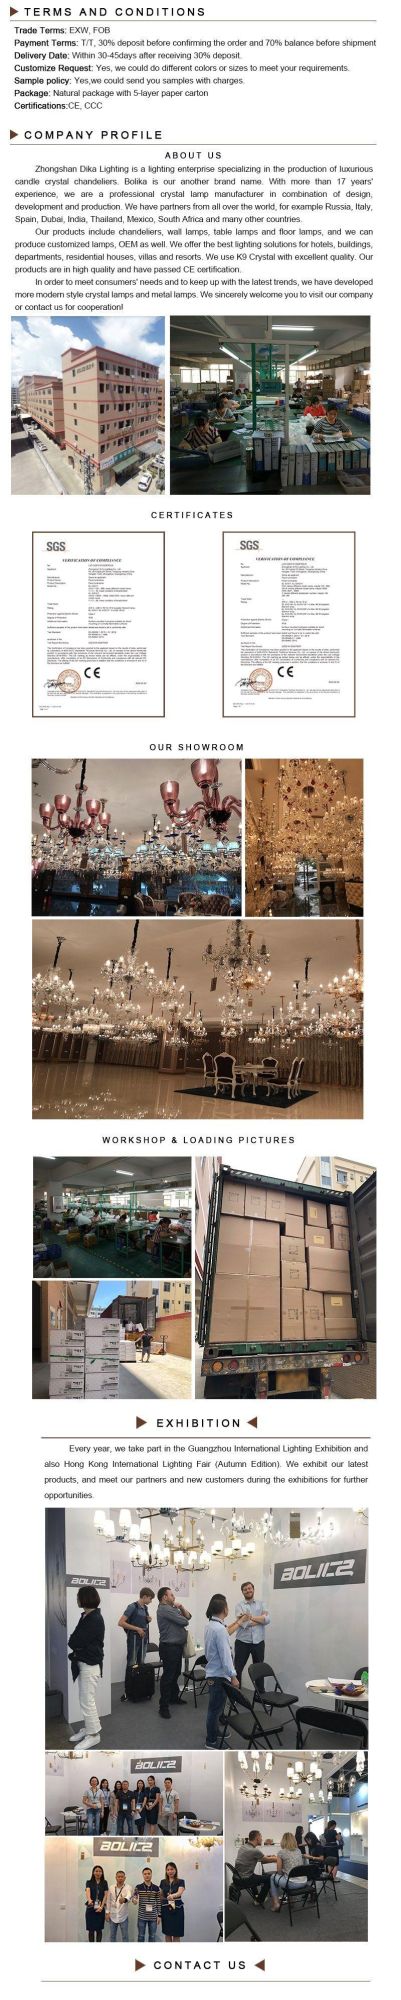 American Style Latest Elegant Living Room/ Restaurant Ceiling Lamp Shades Chandelier China Factory Supplier